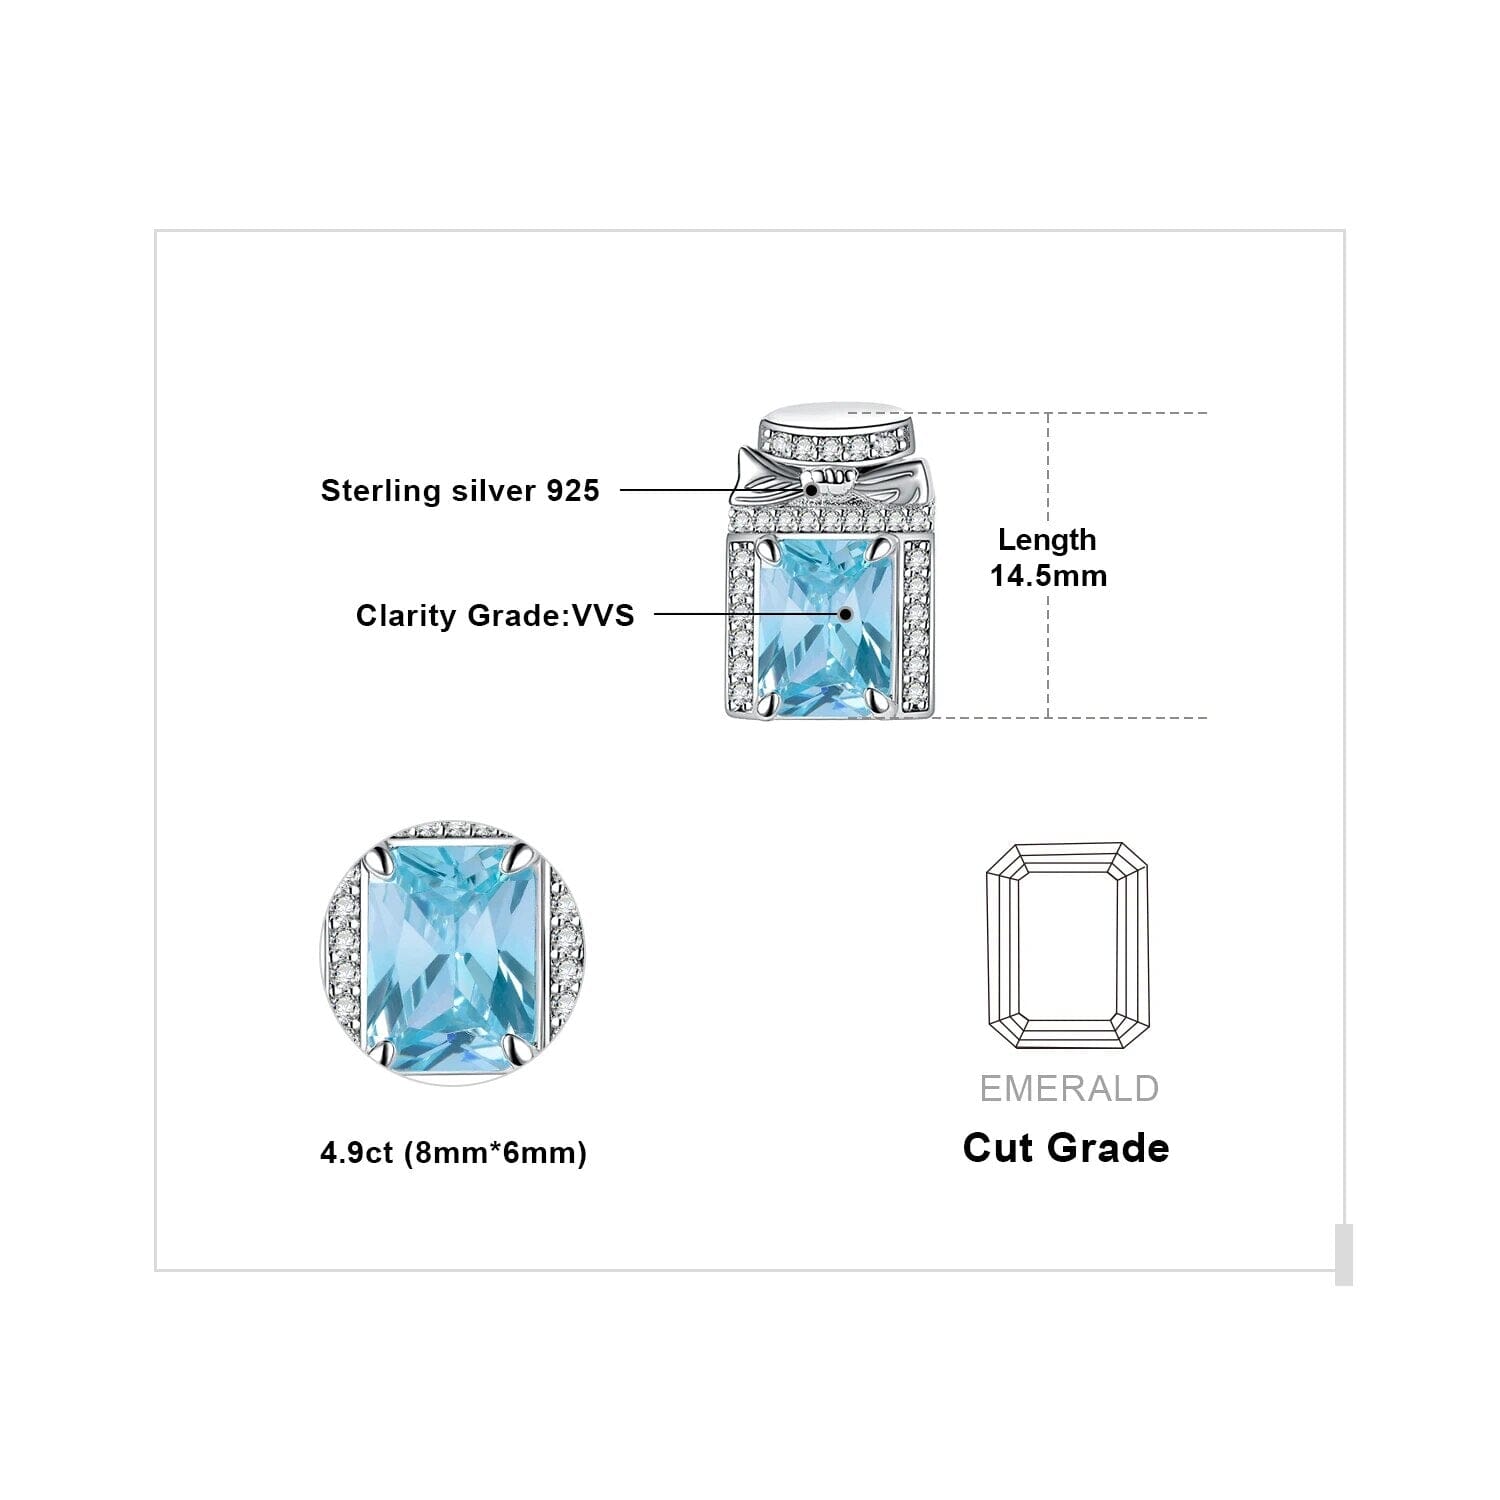 Bow Knot 5.4ct Aquamarine 925 Sterling Silver Stud EarringsEarrings